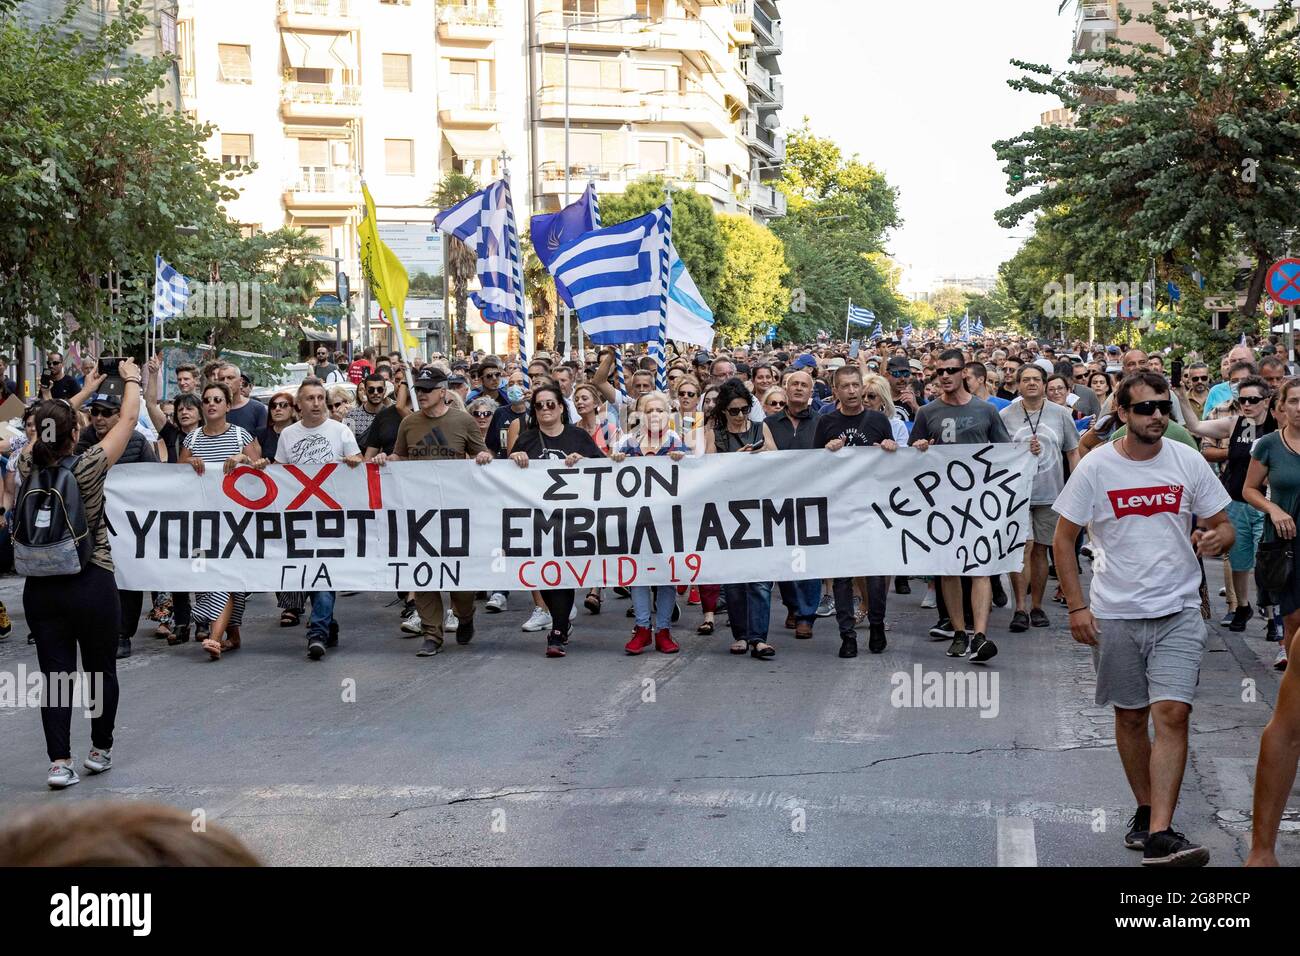 Thessaloniki, Greece. 21st July, 2021. Protesters march while holding flags  and a banner reading "No to the Mandatory Vaccine during the  protest.Thousands of anti-vaccination demonstrators march through  Thessaloniki in demonstration against the